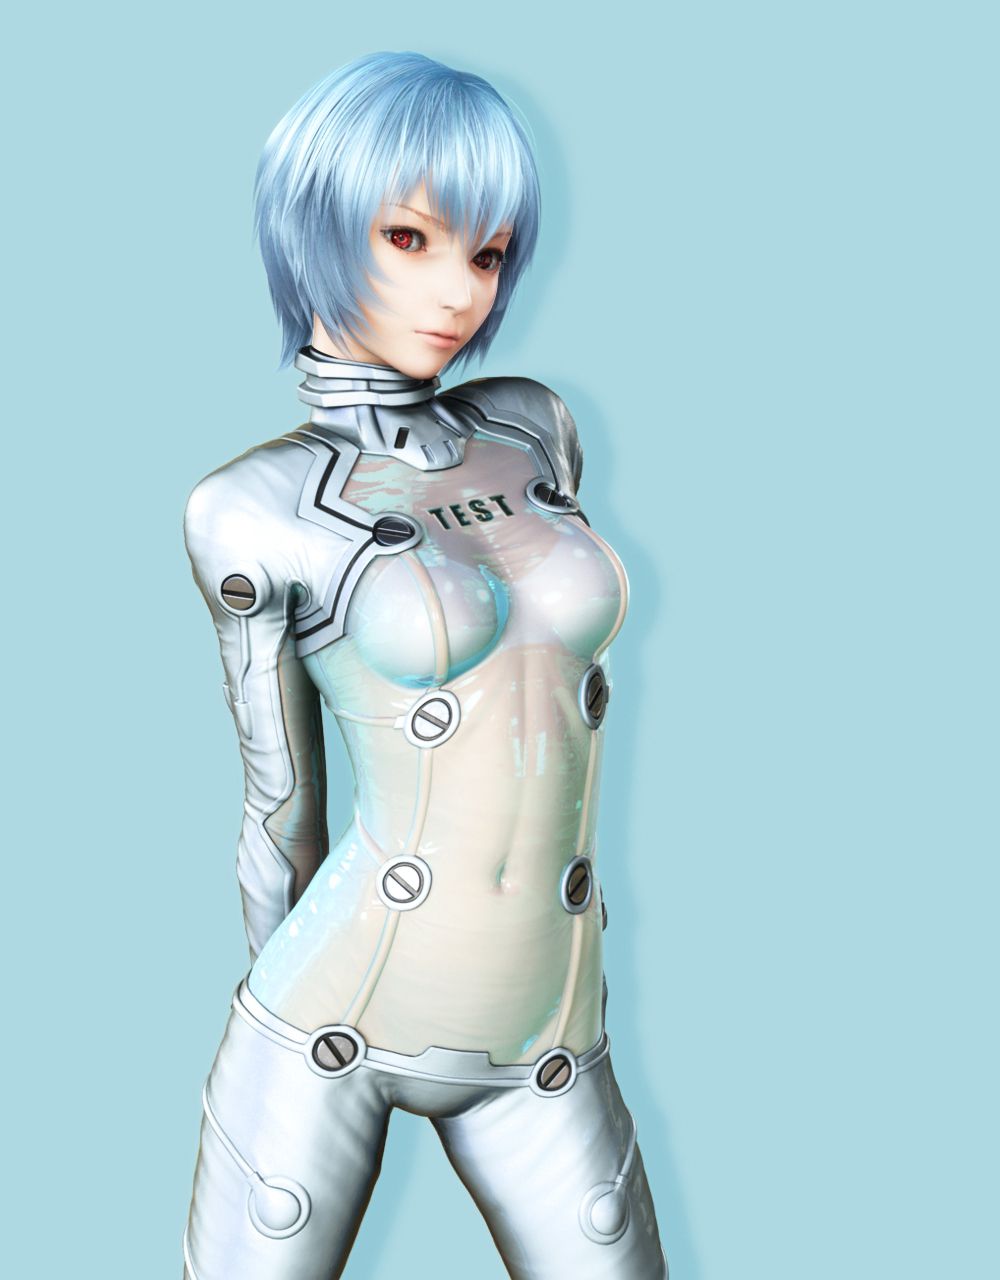 A dosage of 3D girls 155